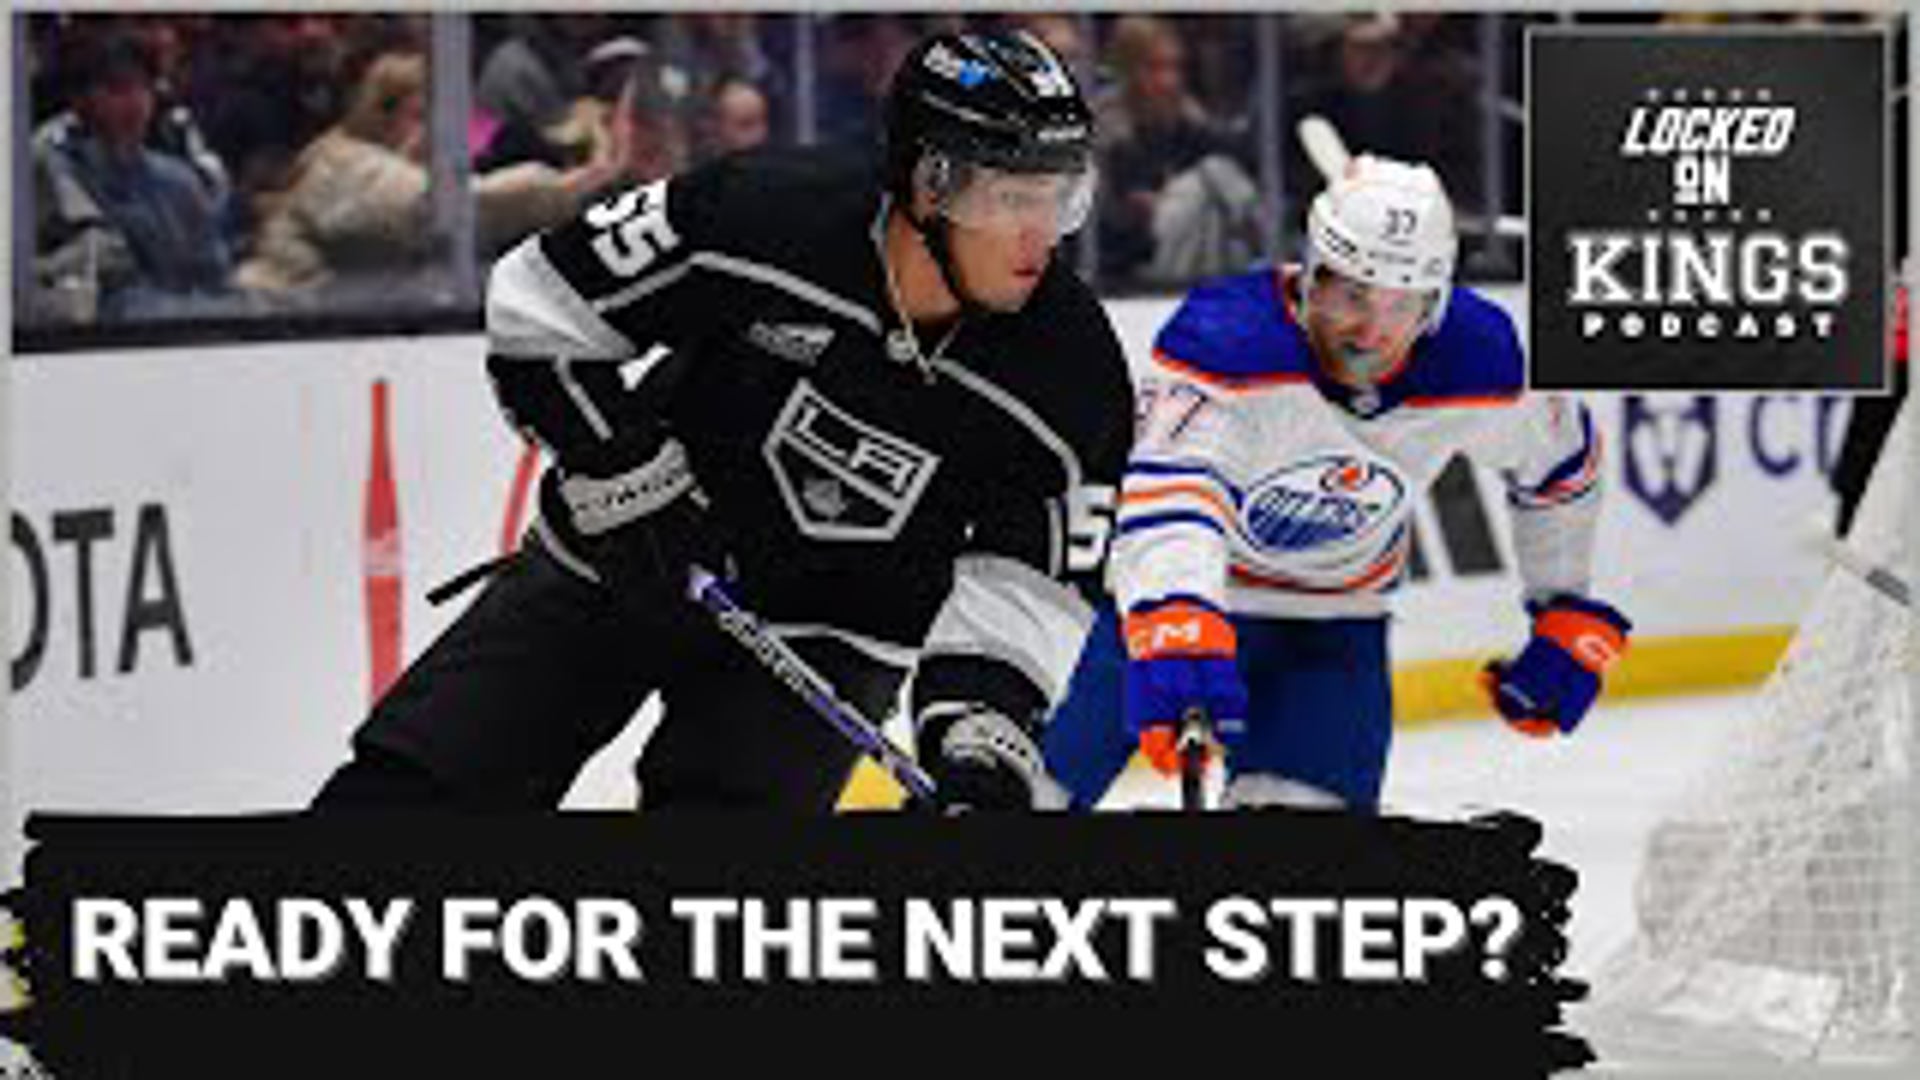 Should we now feeling differently about how the Kings season came to an end since the Edmonton Oilers have advanced to the Stanley Cup Final?